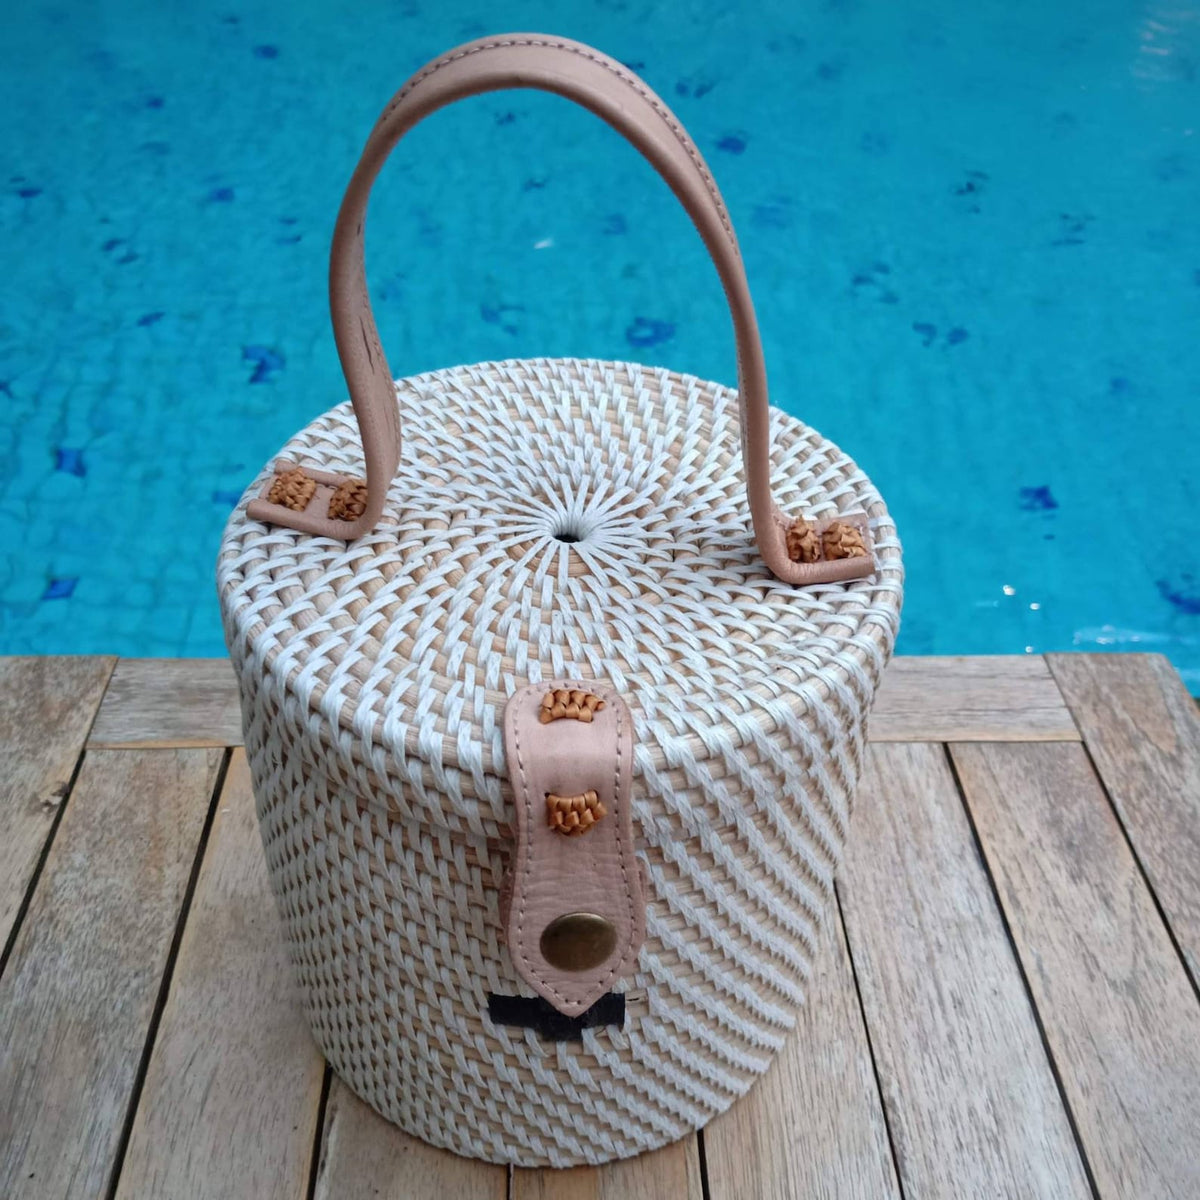 Woven Natural Rattan Cylinder Shaped Bag With Leather Strap